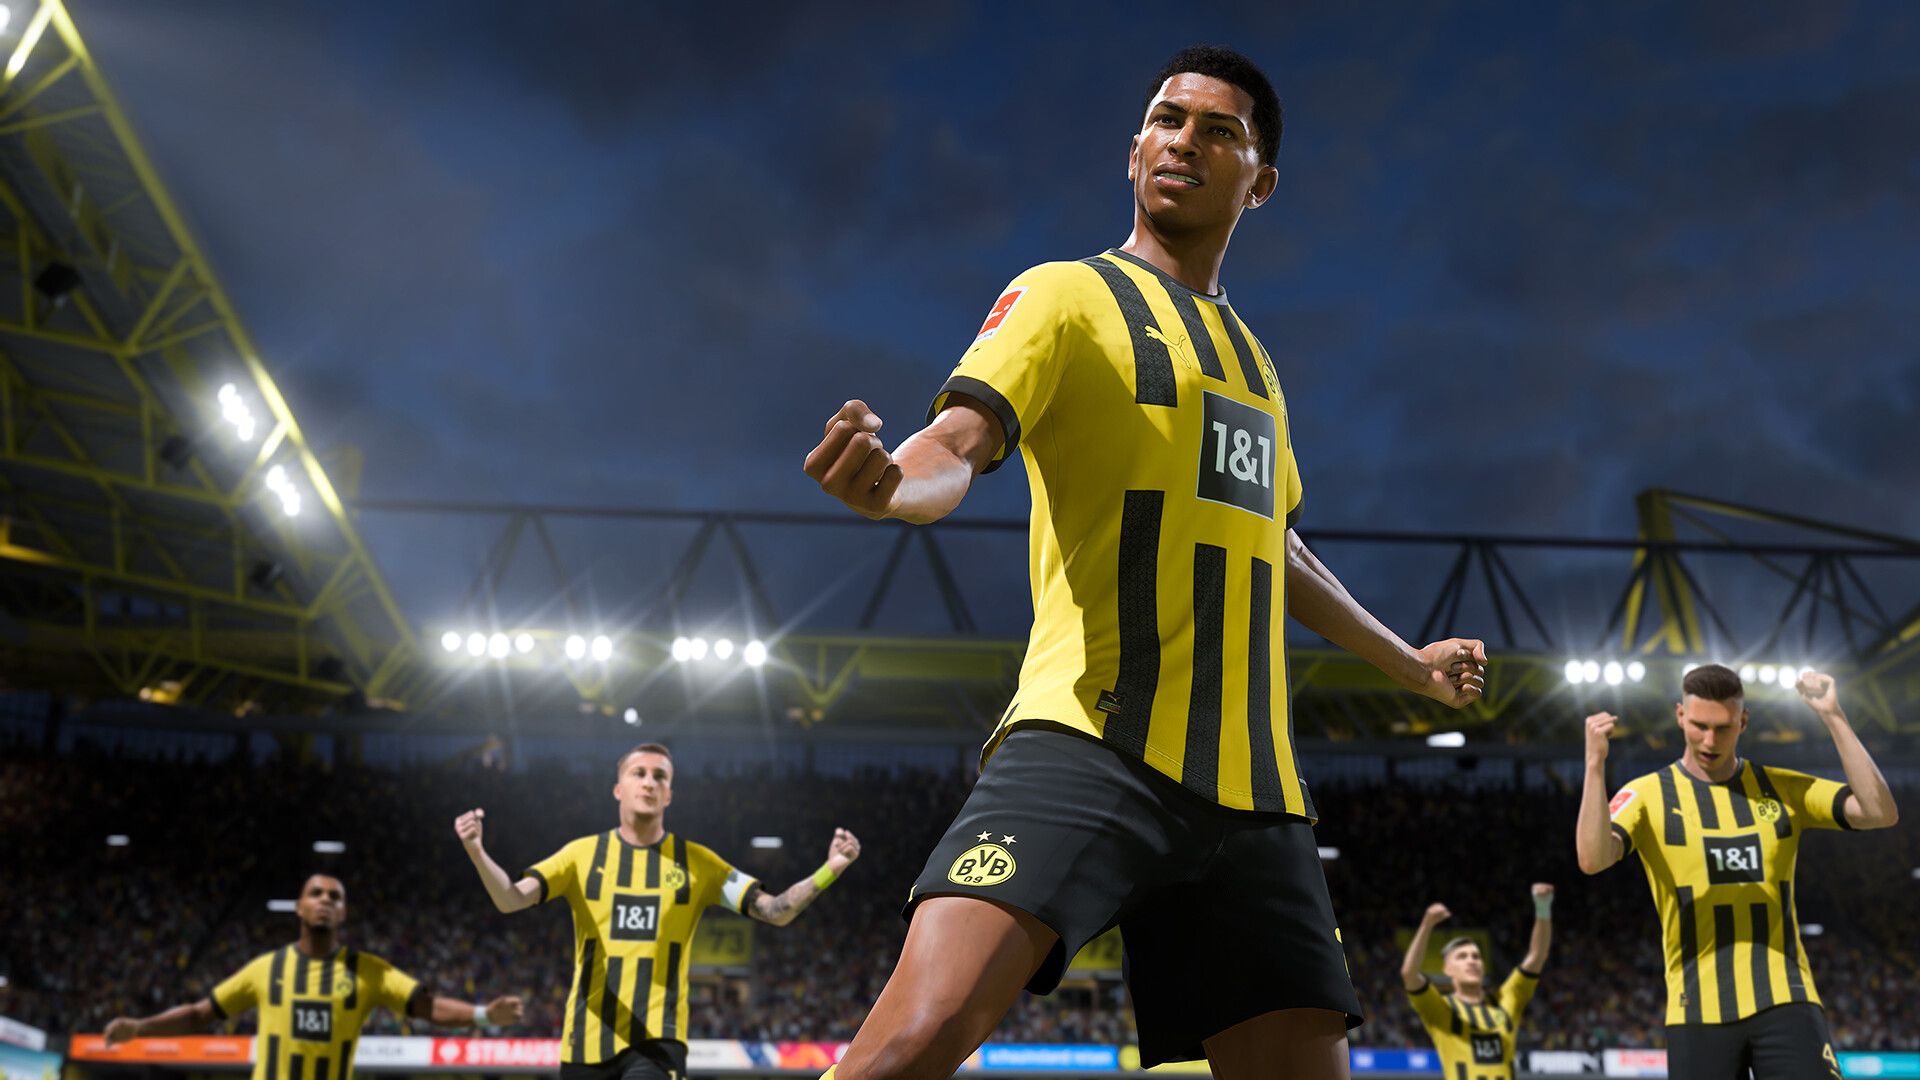 In this article, we are going to be covering how to get FGS Swaps FIFA 23 and help you get tokens in FIFA 23.